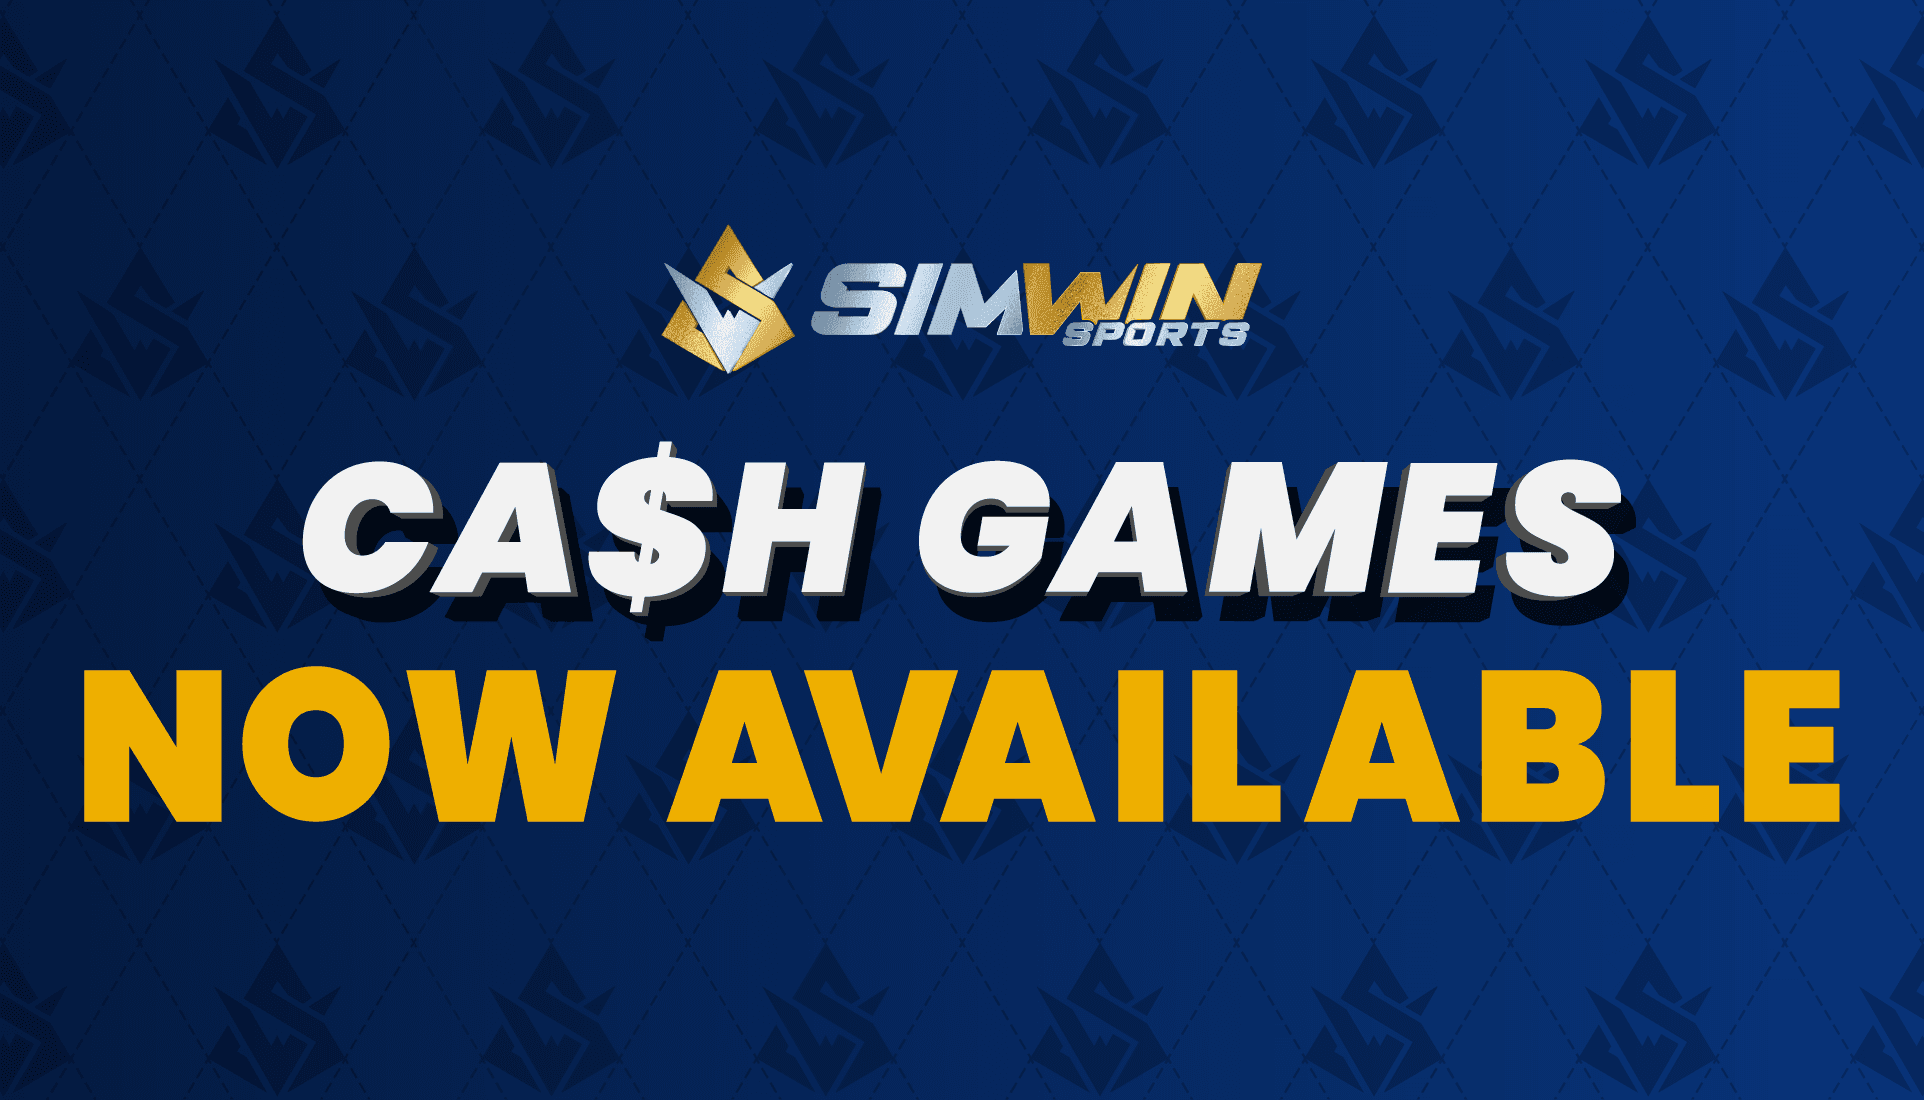 Cash Games Available Now